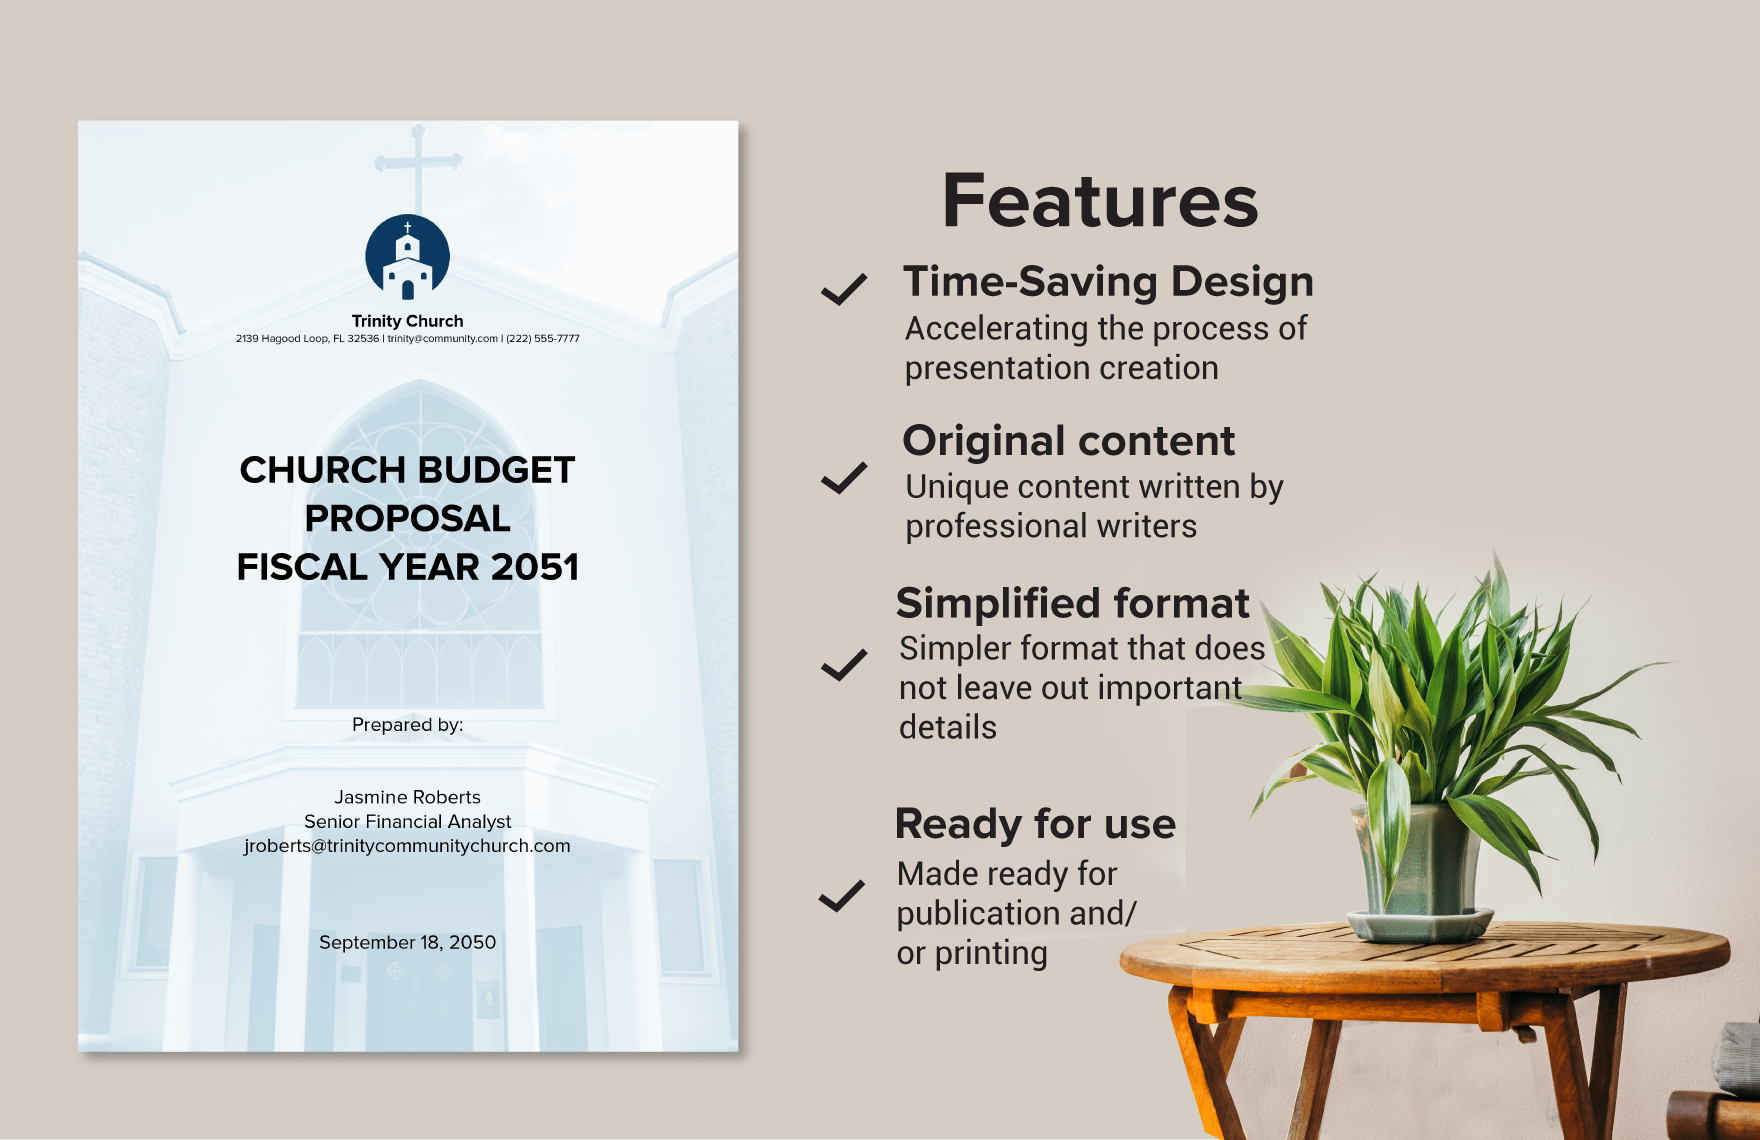 Simple Church Budget Proposal Template